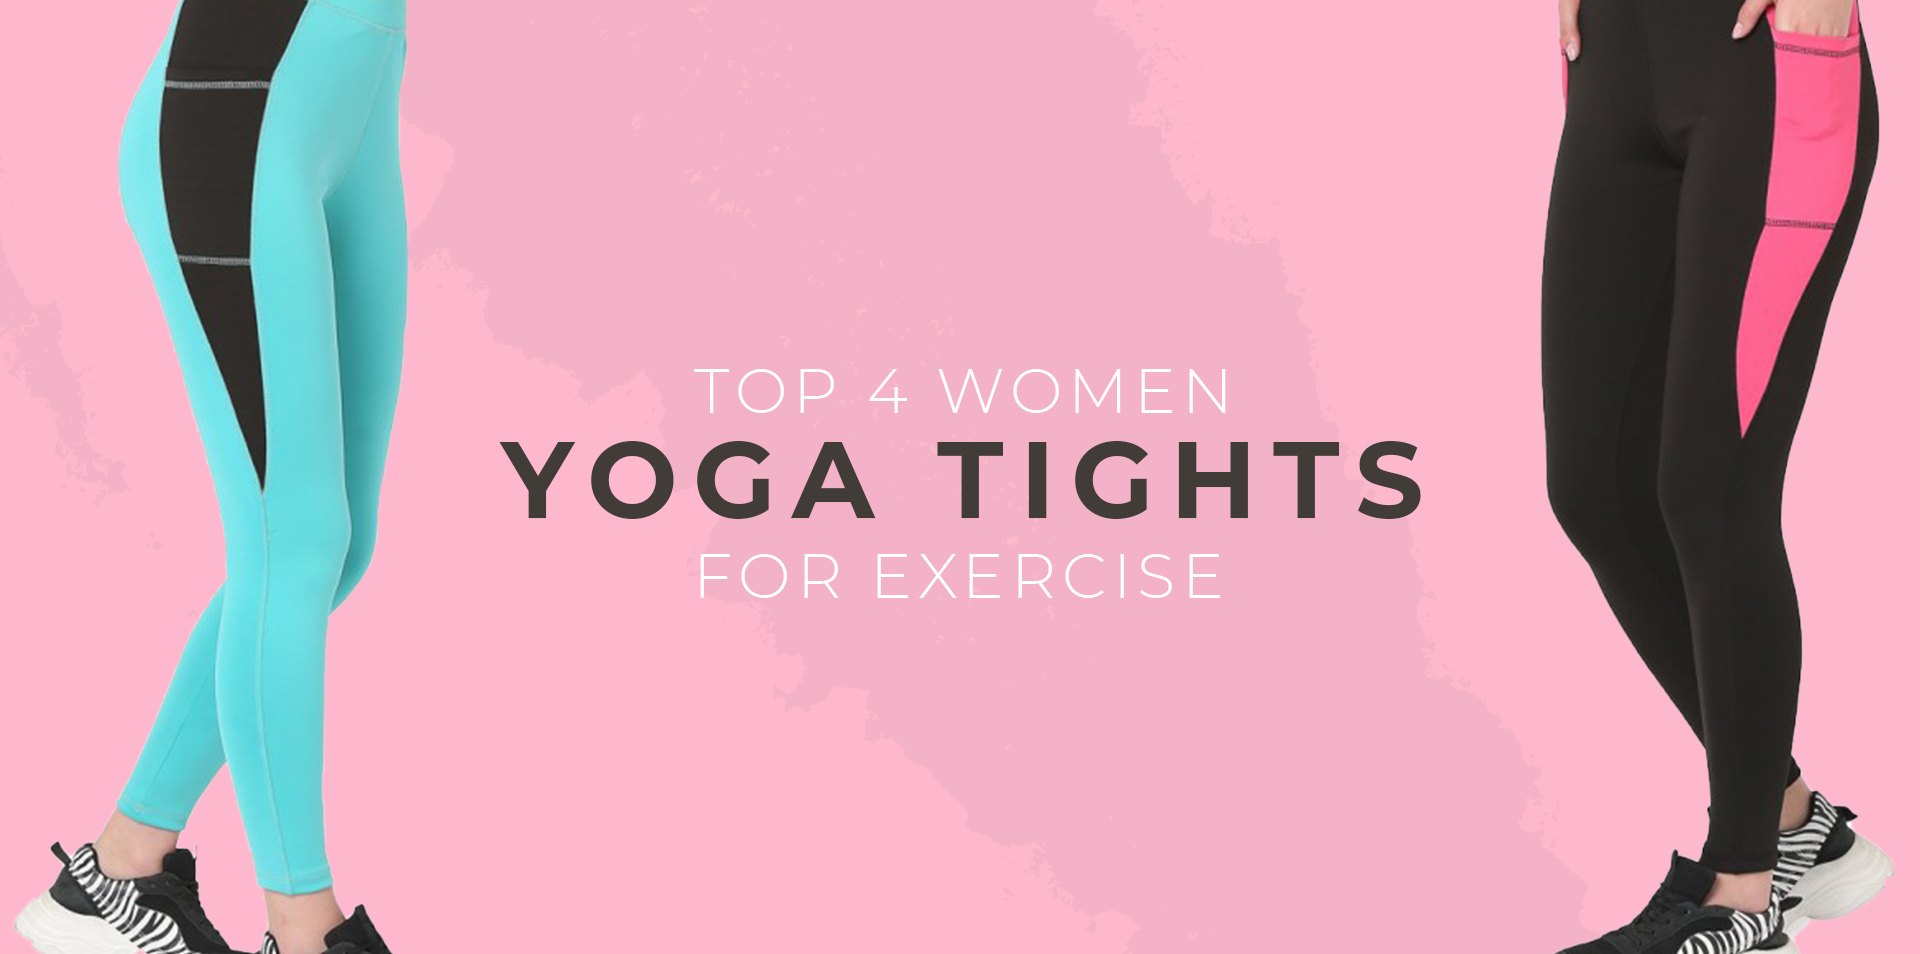 Top 4 women yoga tights for exercise